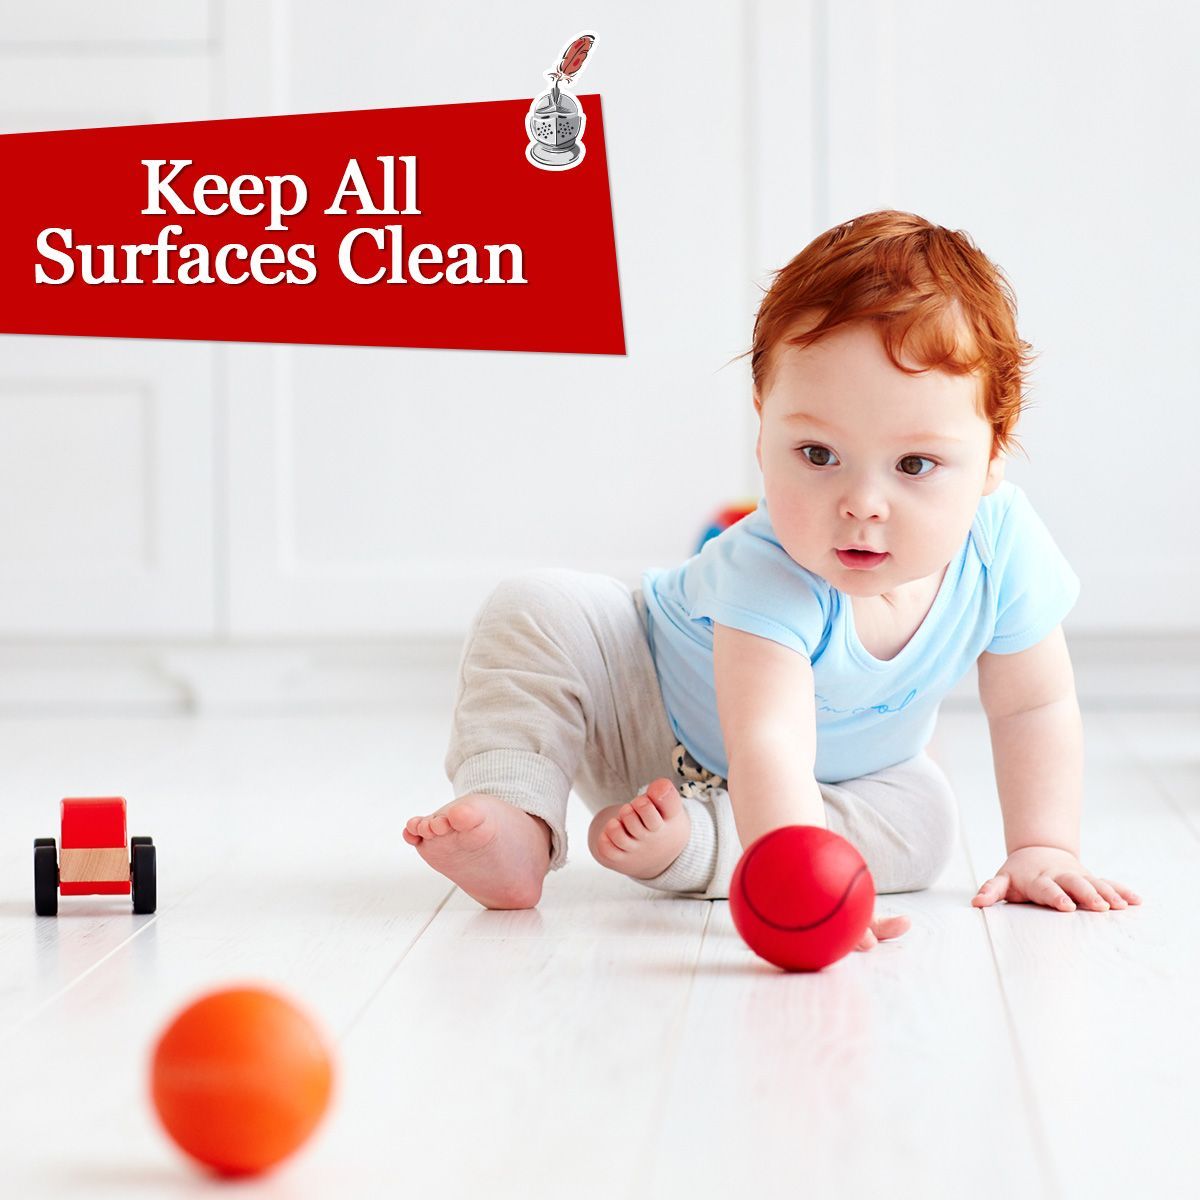 Keep All Surfaces Clean